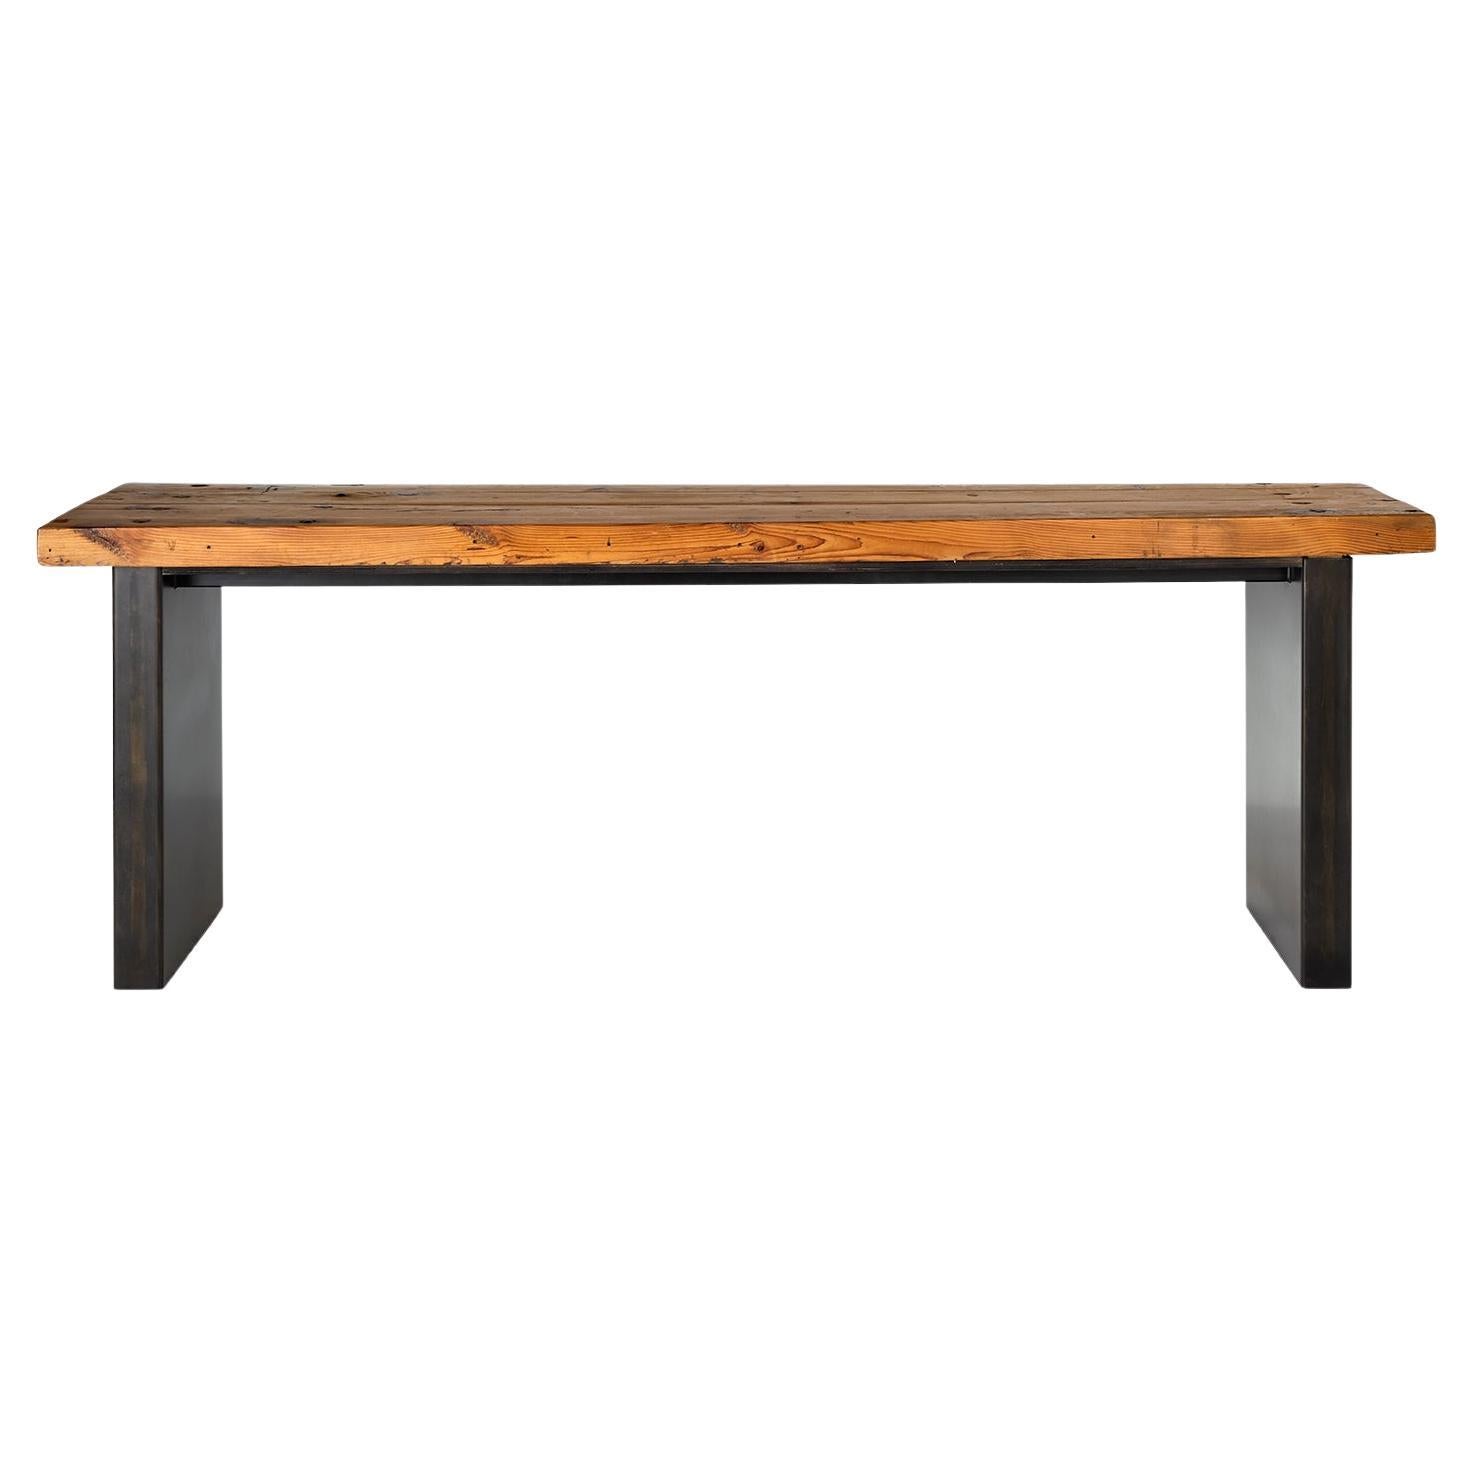 Wood Plank Top on Patinaed Steel Base Console For Sale